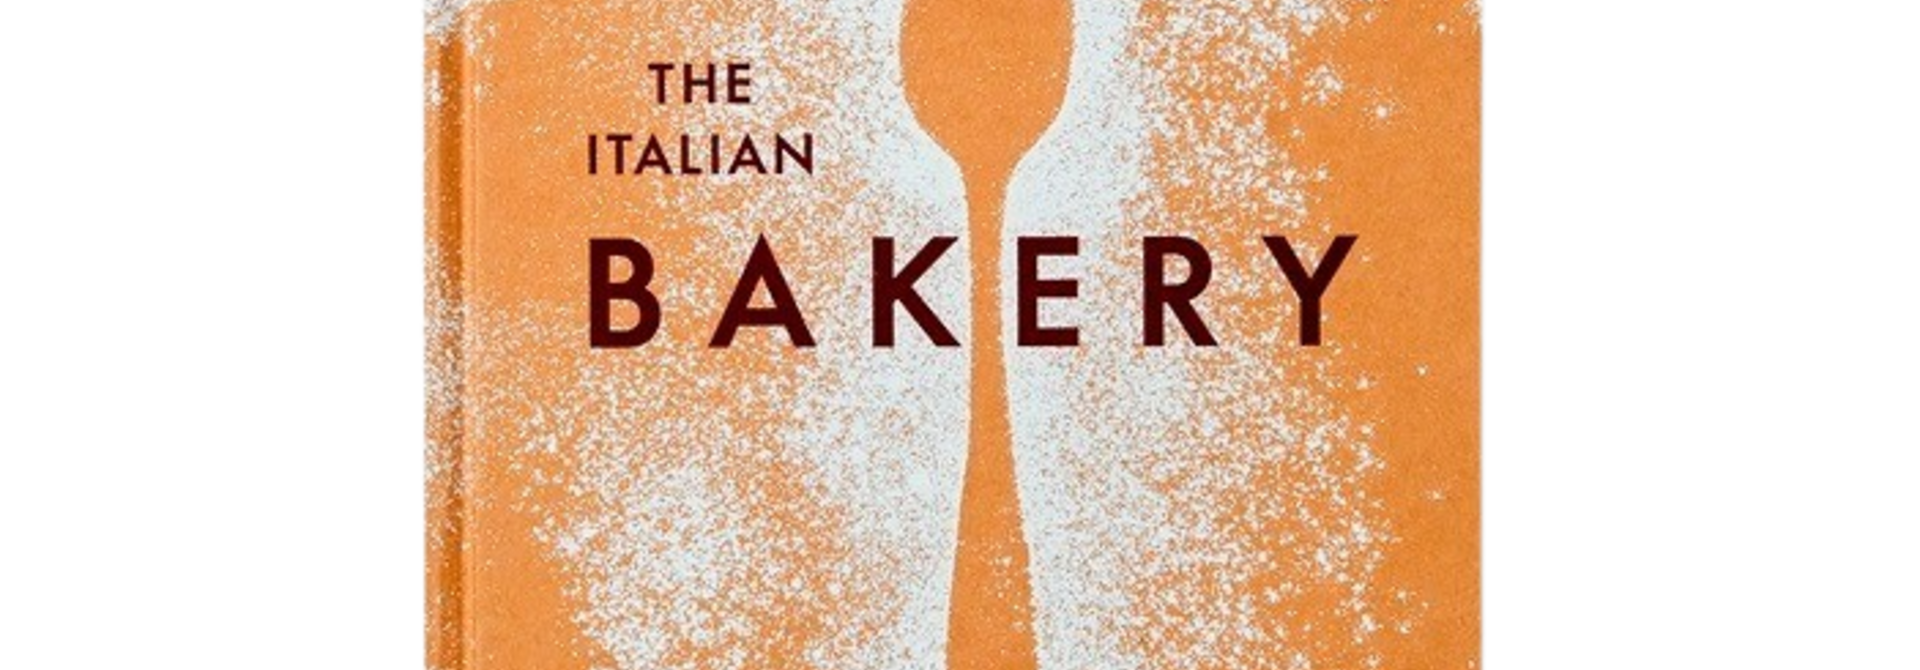 The Italian Bakery | The Cookbook Collection